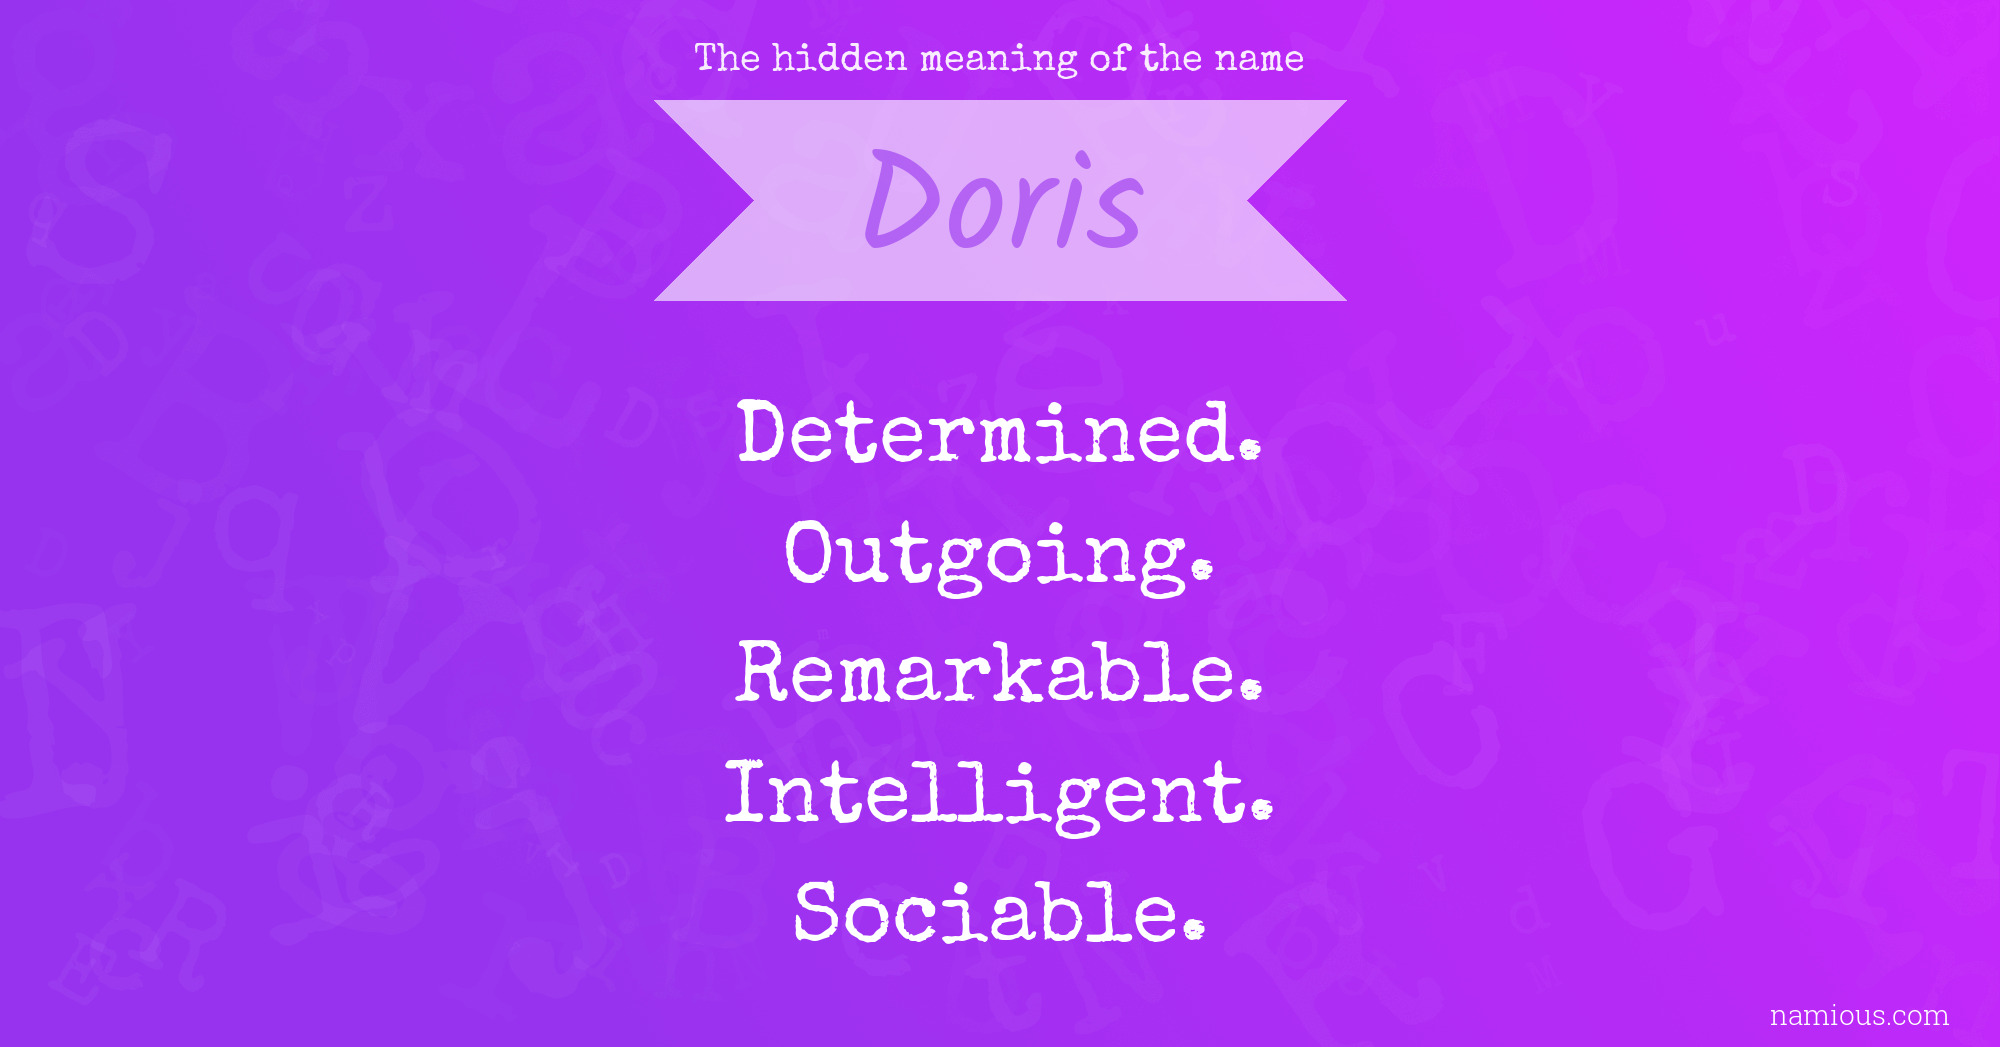 The hidden meaning of the name Doris